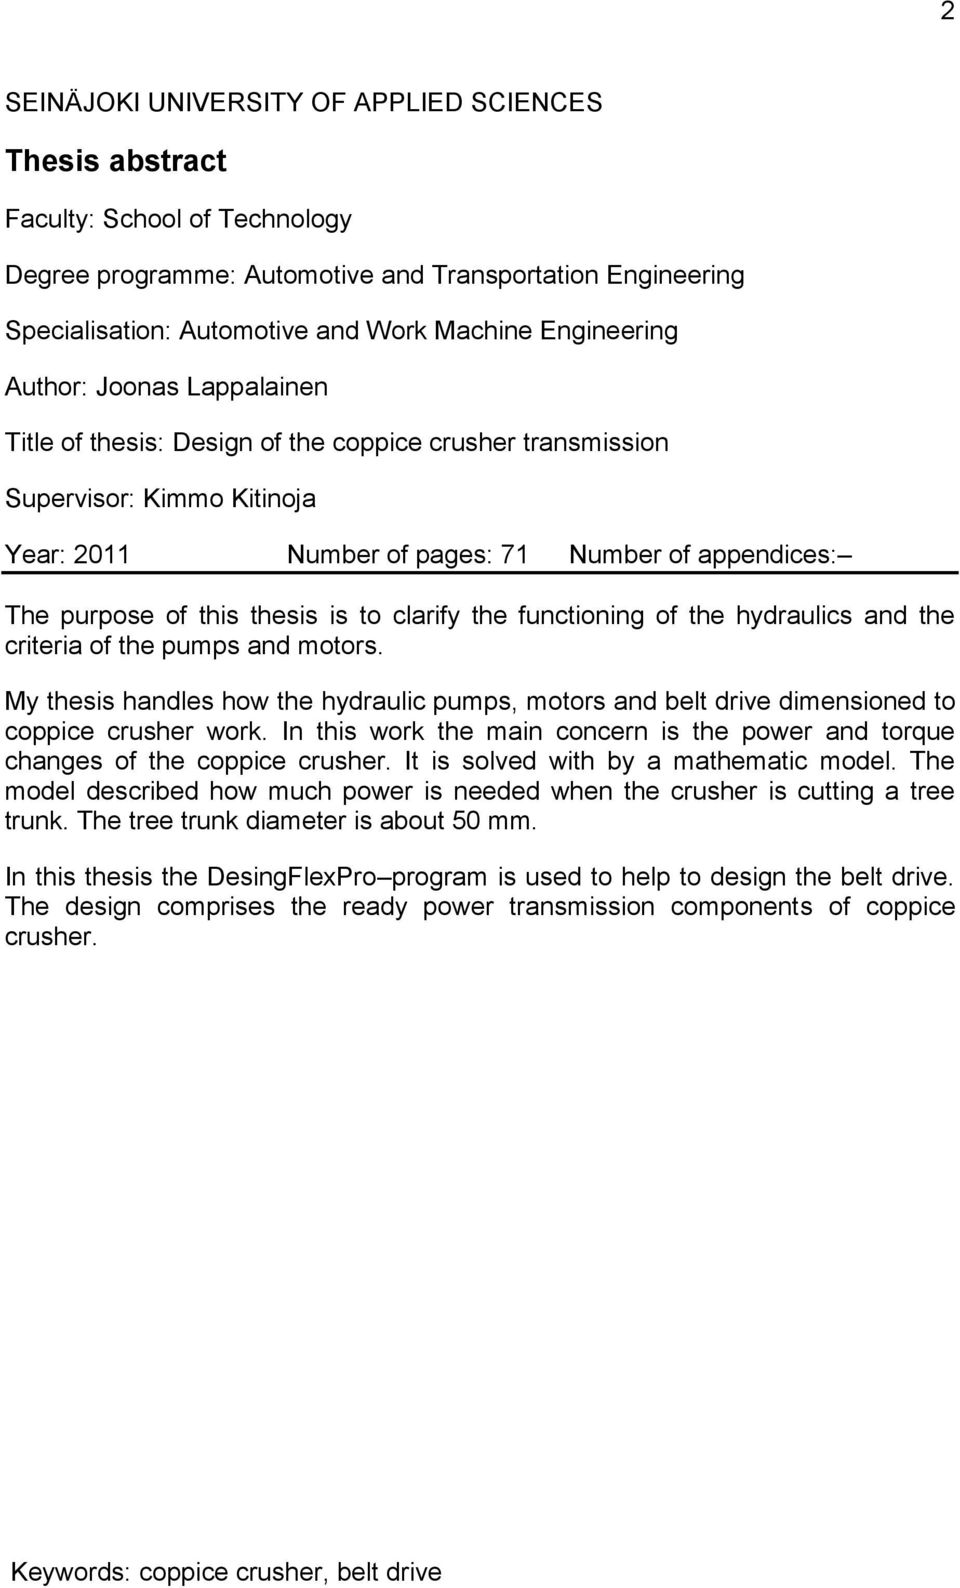 thesis is to clarify the functioning of the hydraulics and the criteria of the pumps and motors. My thesis handles how the hydraulic pumps, motors and belt drive dimensioned to coppice crusher work.